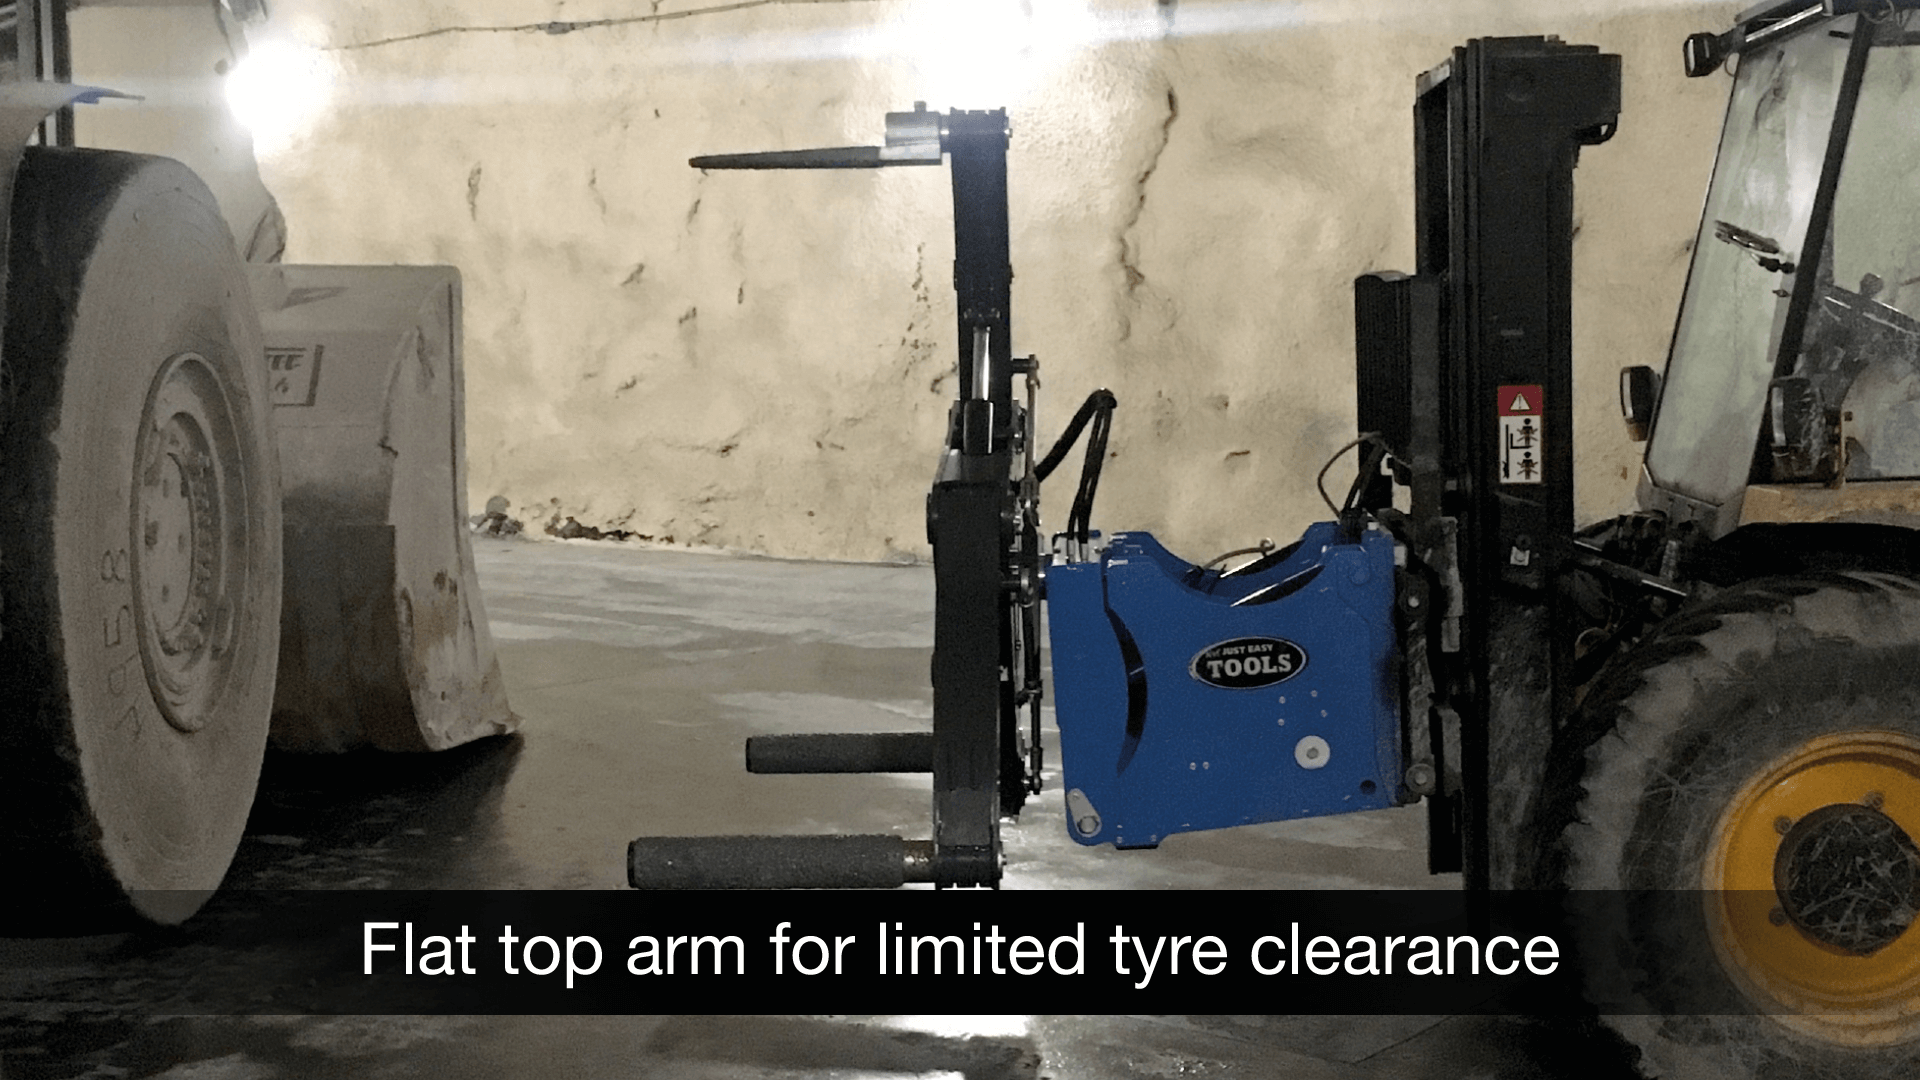 Best tyre practice - Flat top arm for limited clearance